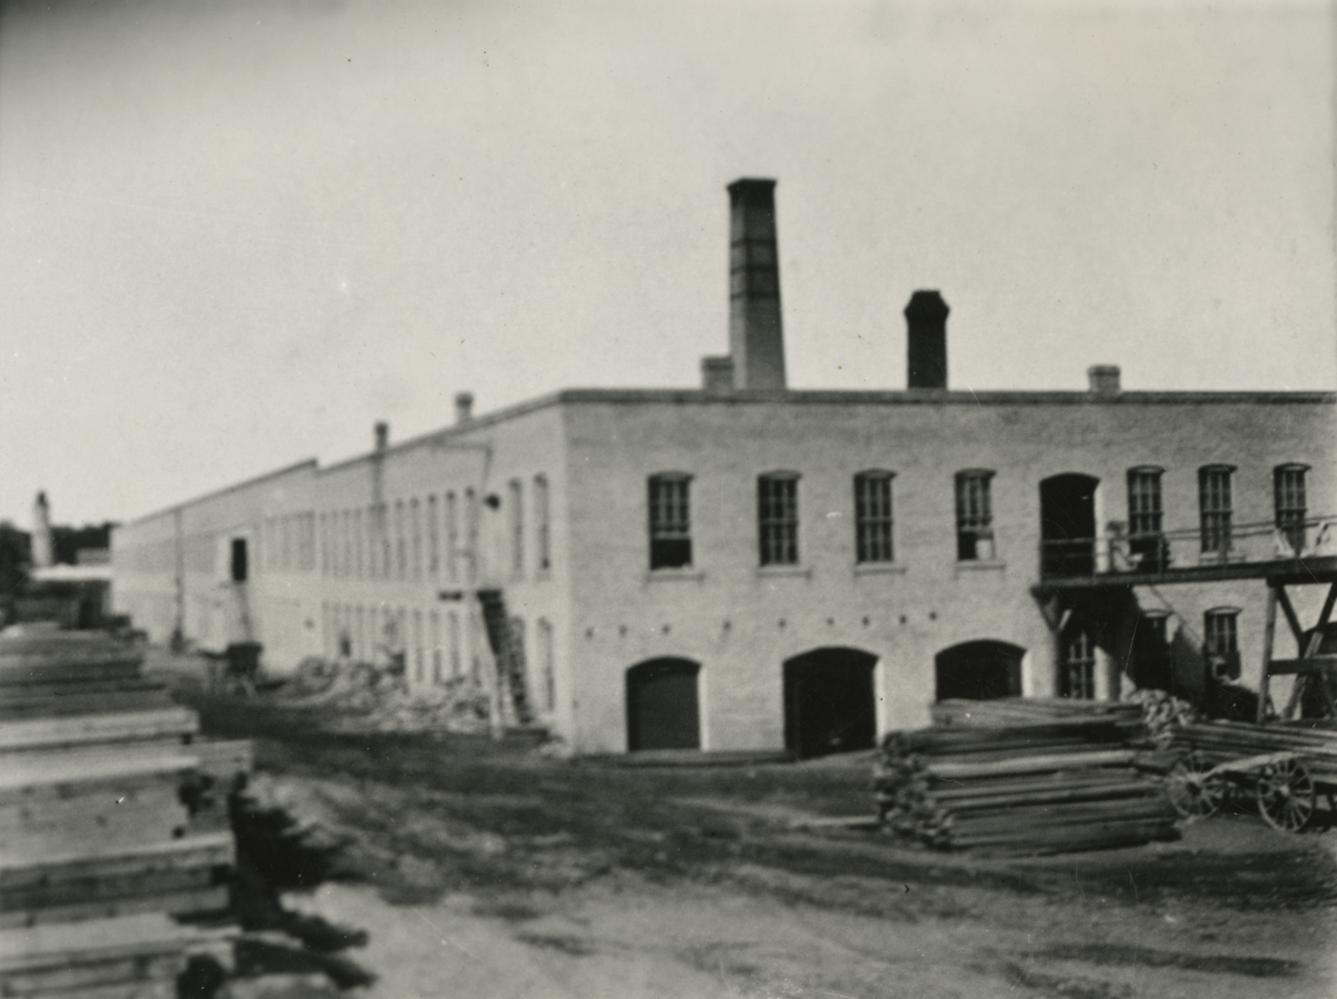 Hannah and Jackson’s first factory